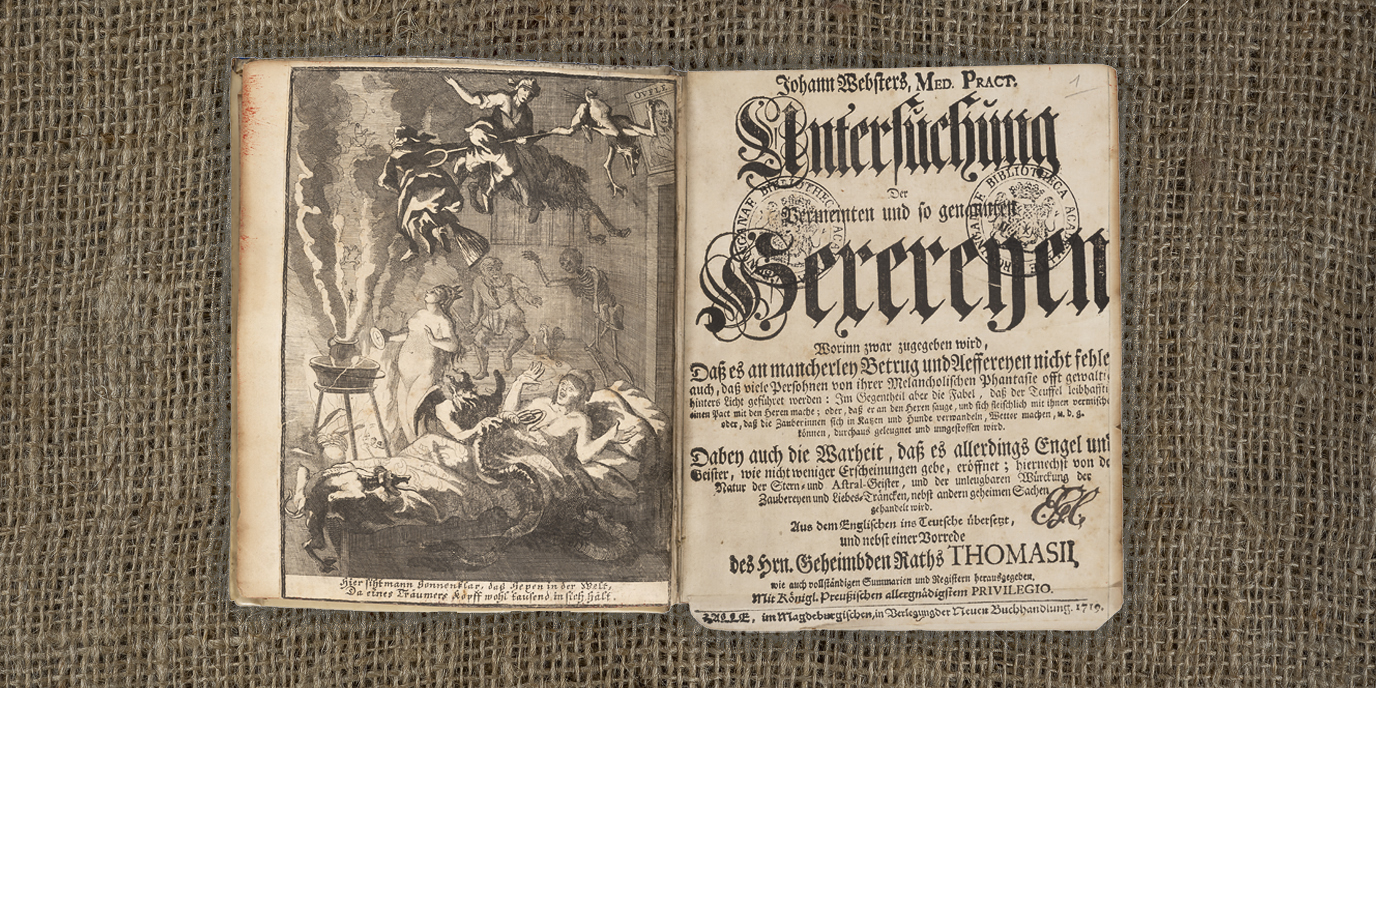 This is a German translation of the English 'The Displaying of Supposed Witchcraft', written by John Webster in 1677. Together with the works of Reginald Scot and Johann Weyer, this is one of the witch-sceptical works of the collection. This translation from 1719 has an image of a ‘dreamer’ taunted by demons and witches.